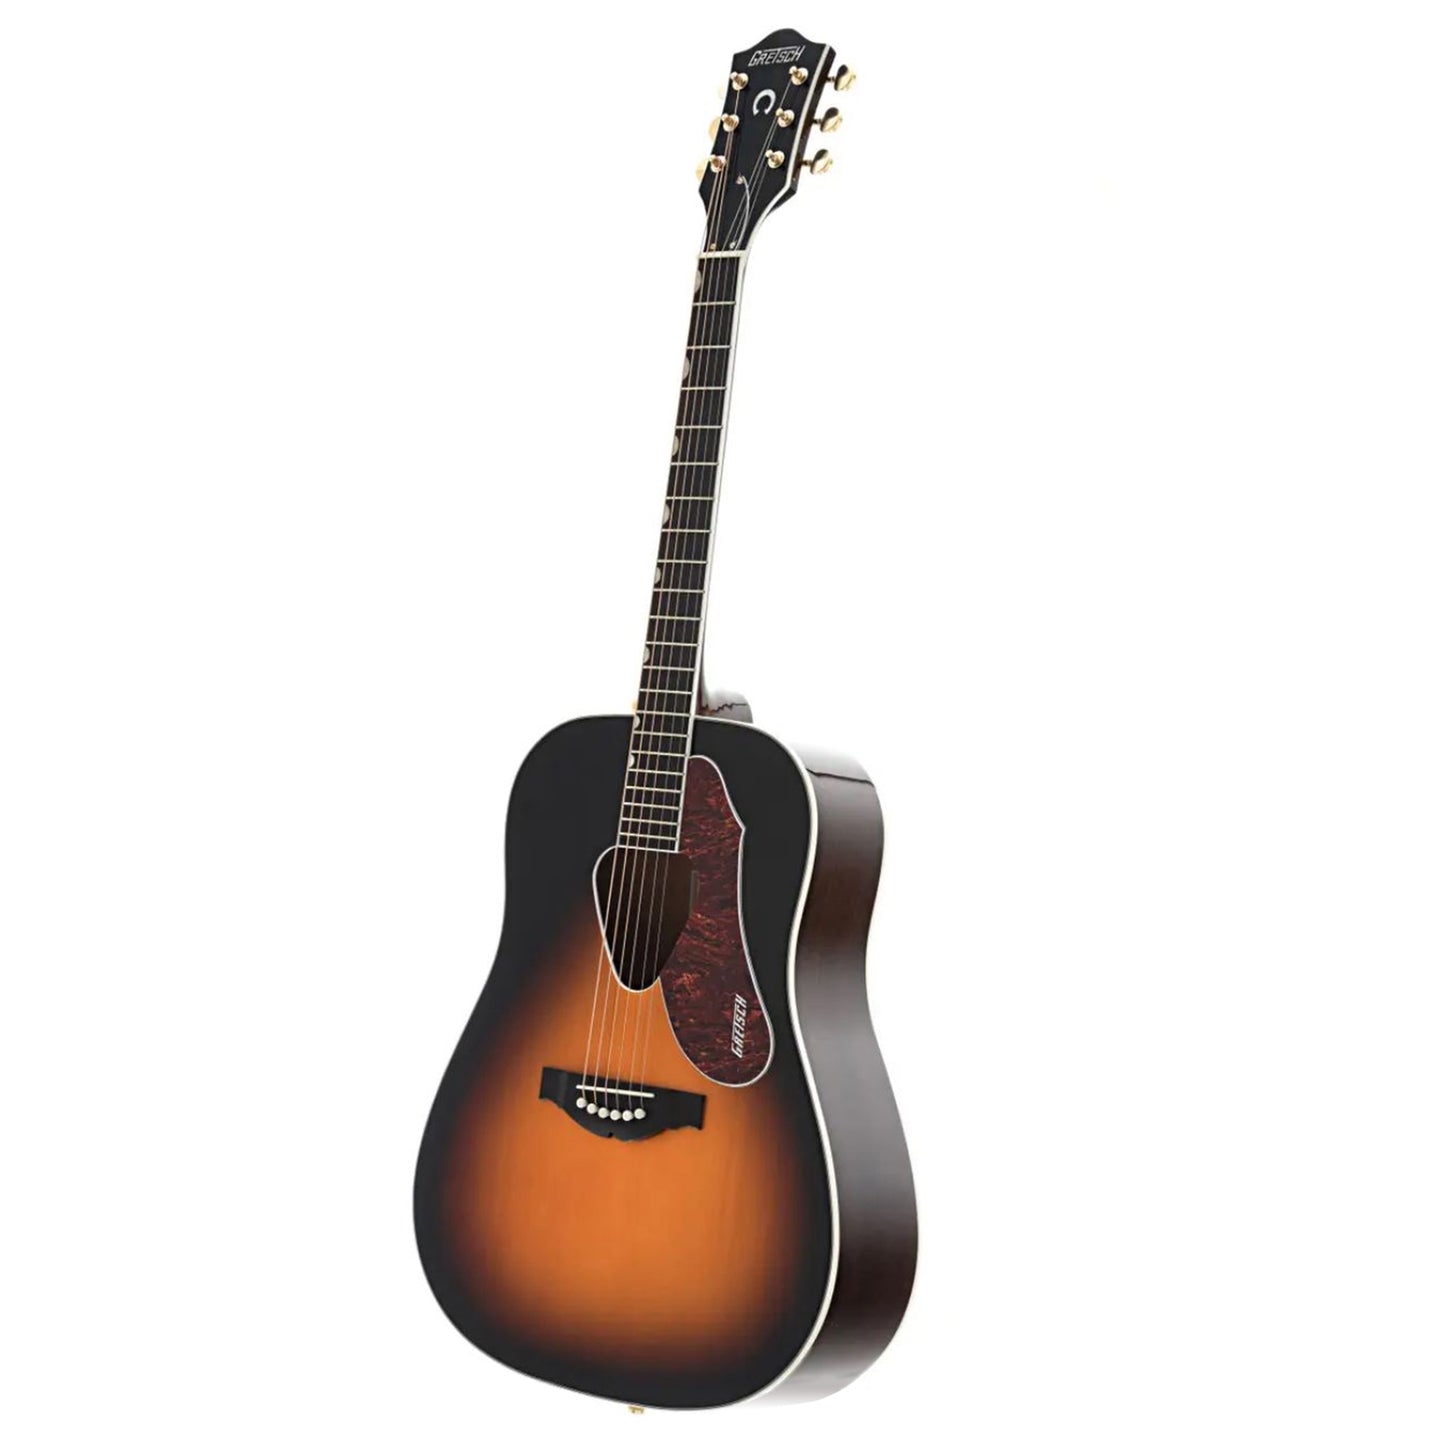 Gretsch G5024E Rancher Dreadnought Acoustic Electric Guitar with Tuner, Volume Tone Controls, Gold Plated Hardware Right-Handed (Sunburst)